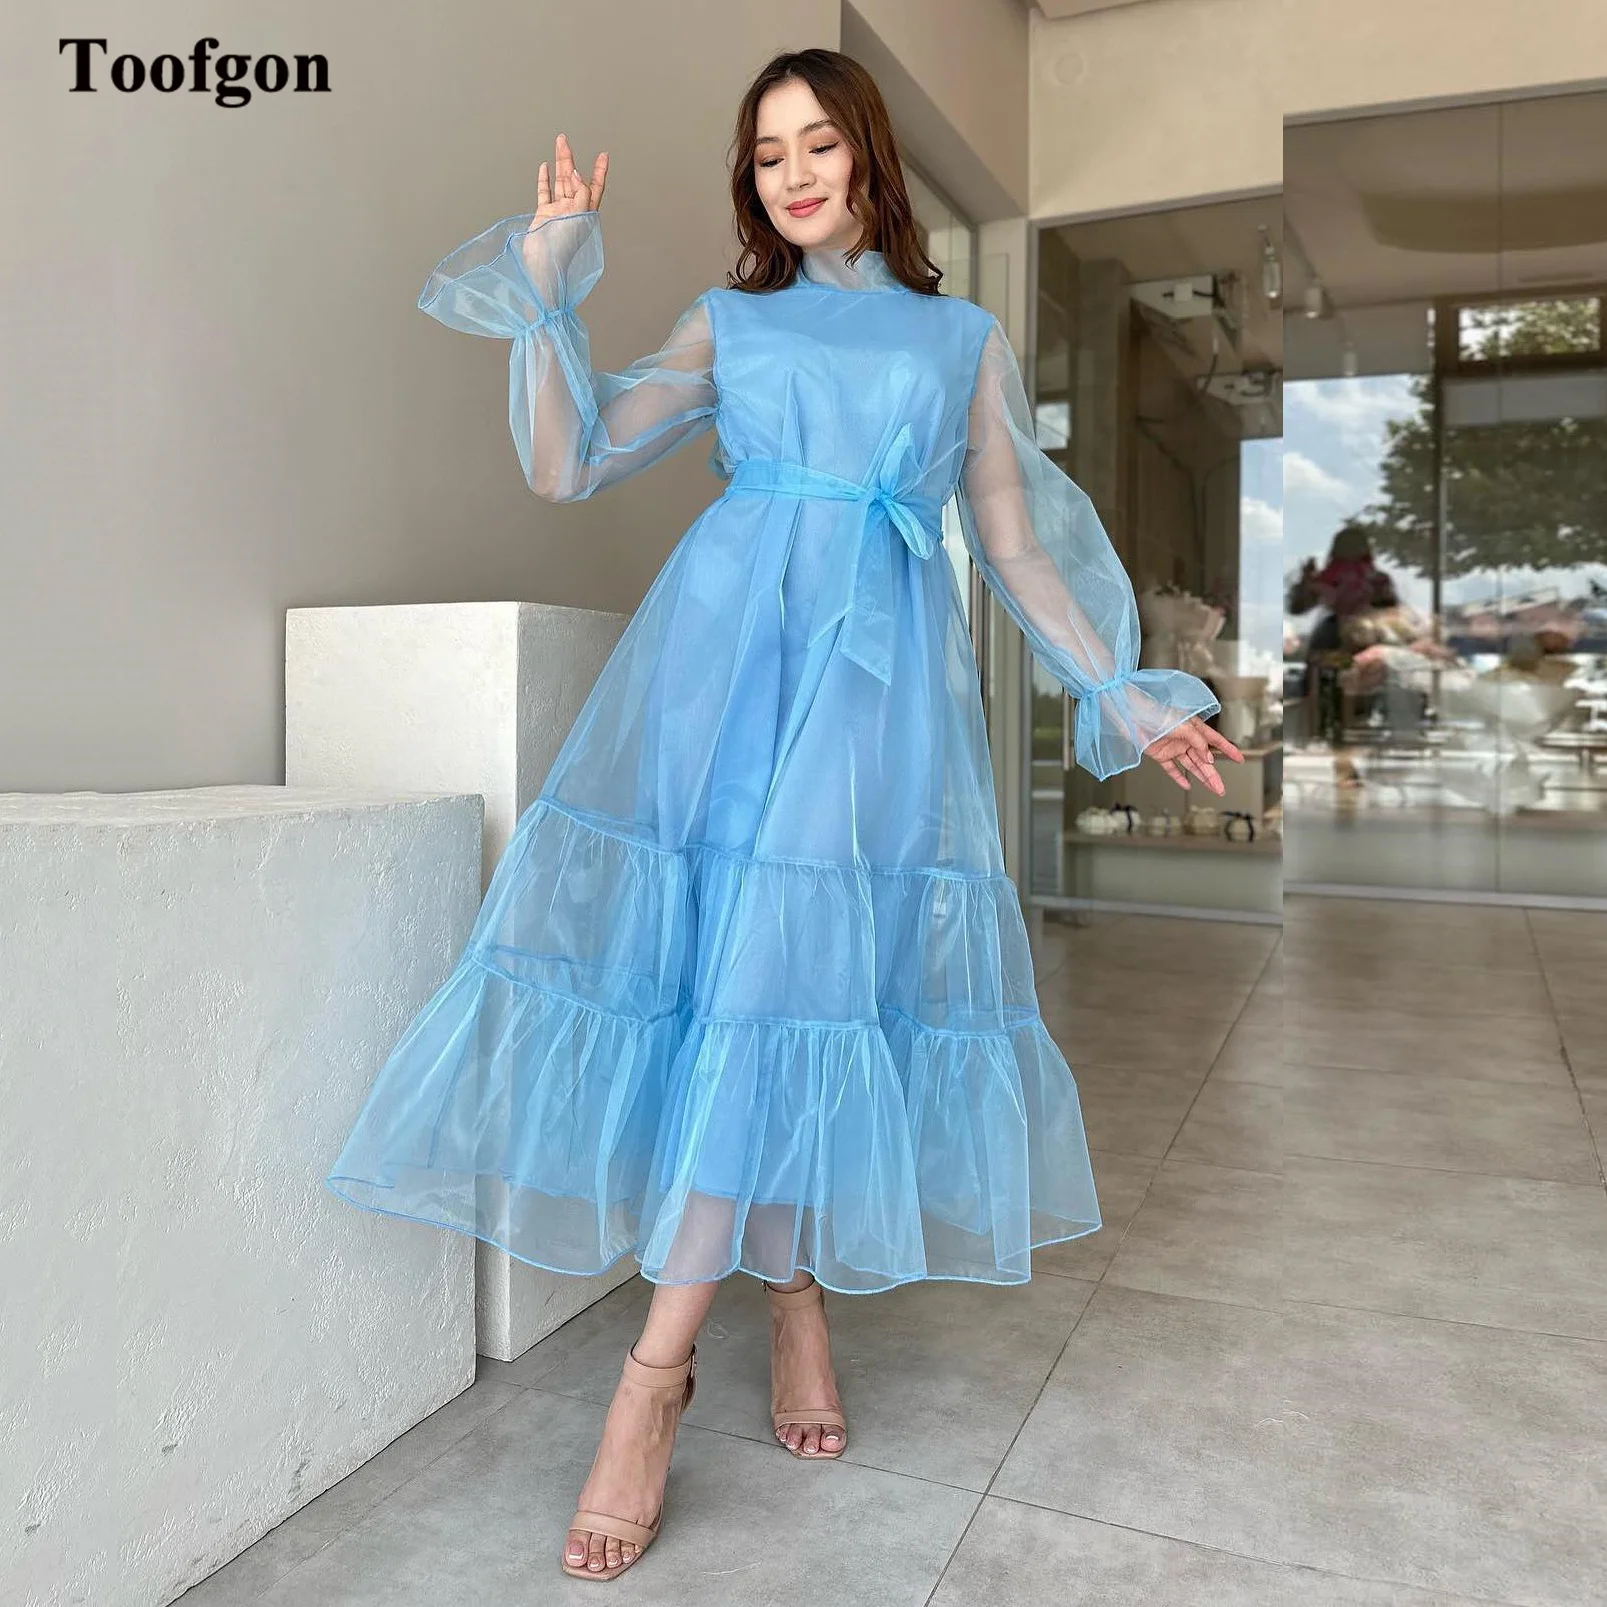 

Toofgon Blue Long Sleeves Prom Dresses Organza Ankle Length Midi Formal Evening Gowns Women Homecoming Party Bridesmaid Dress